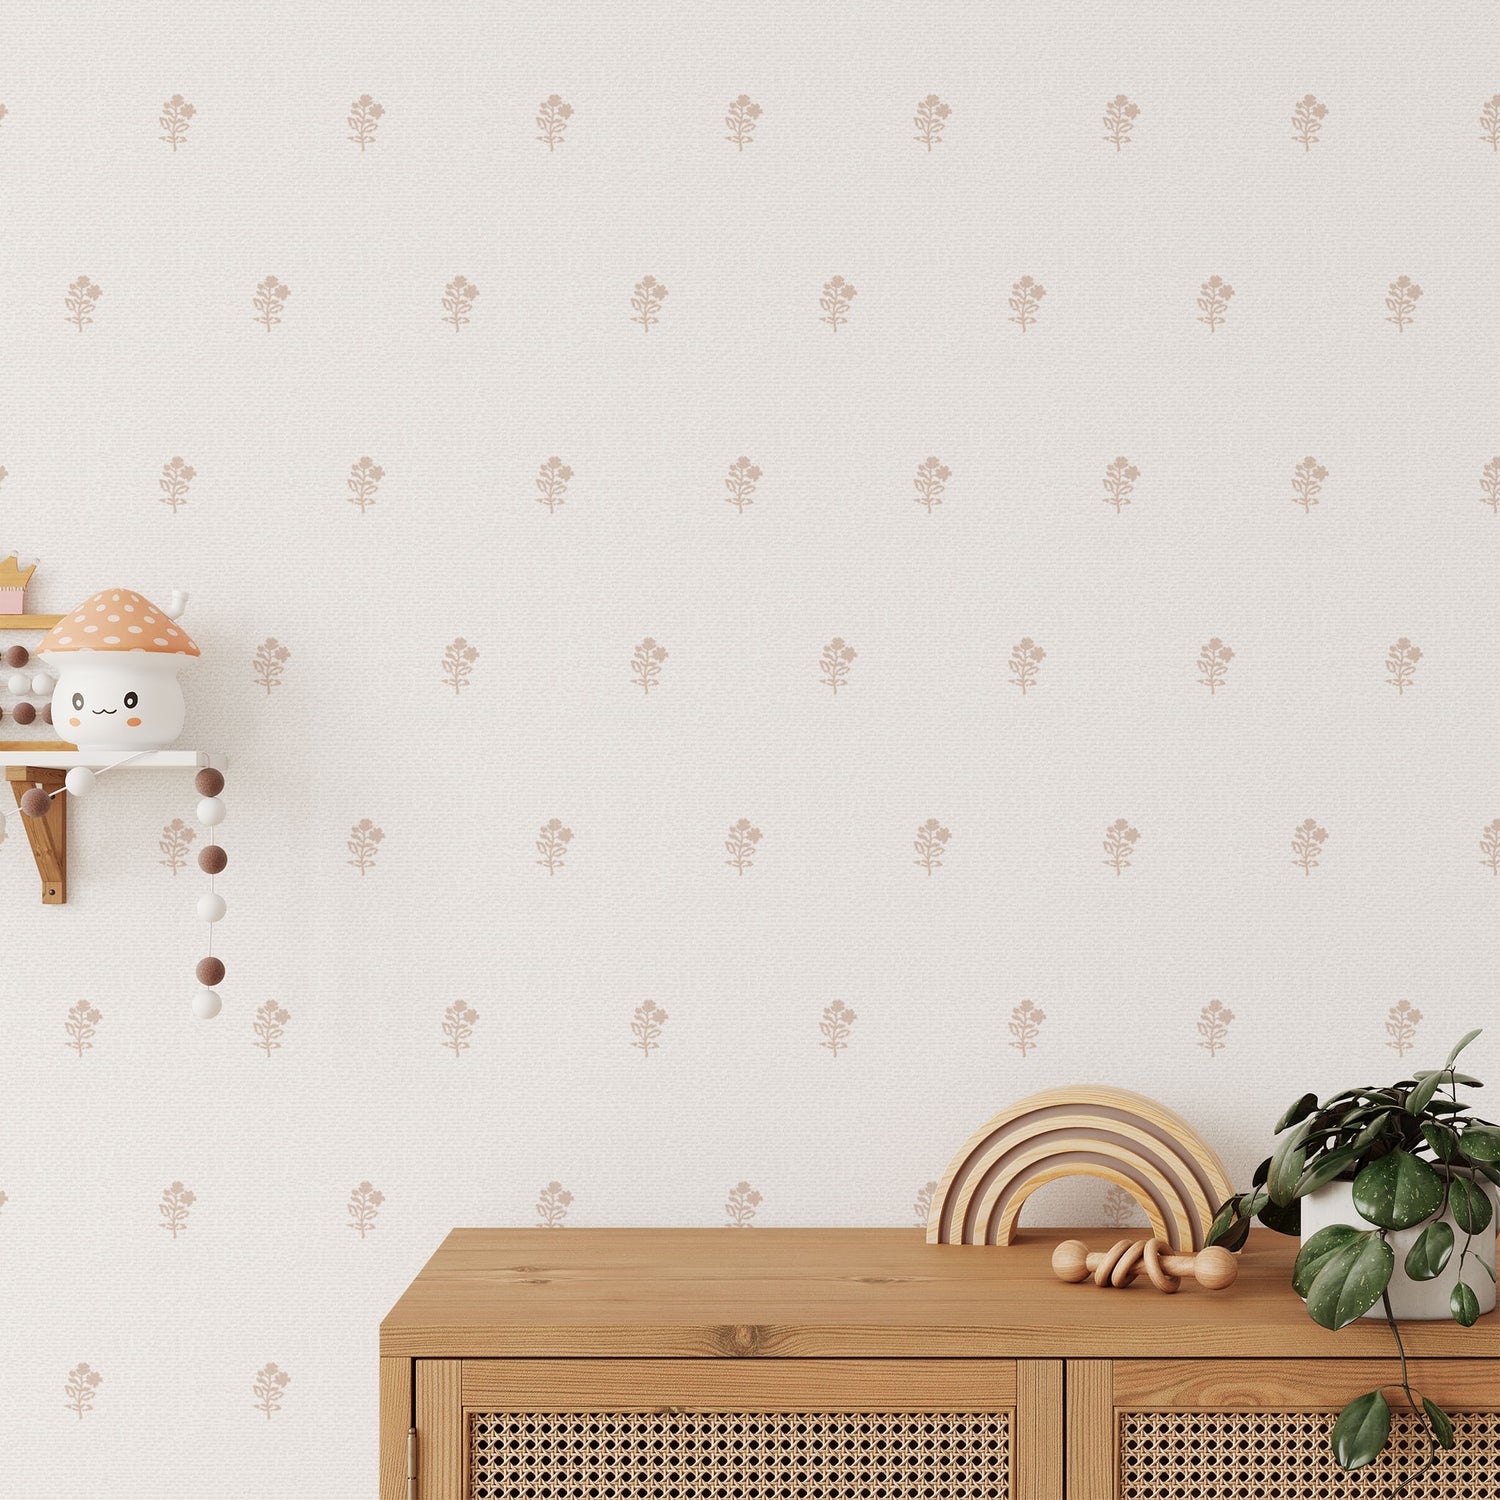 Elevate your space with the Newbury Wallpaper in Nude shown in full size image.